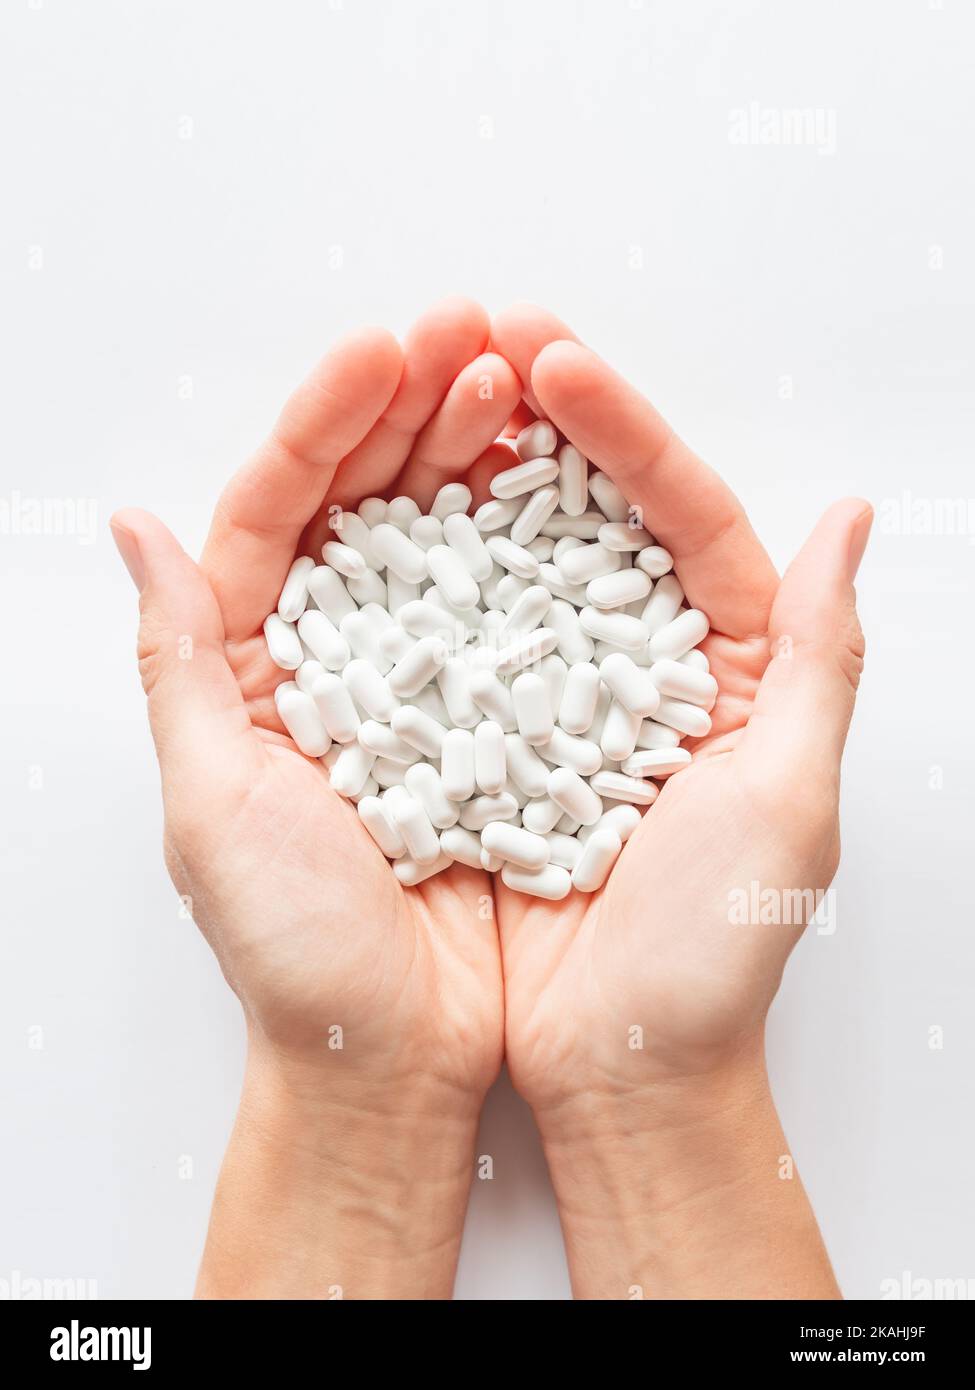 Palm hands full of white scattering pills. Woman gripes hand with capsules with medicines on light background. Flat lay, top view. Stock Photo